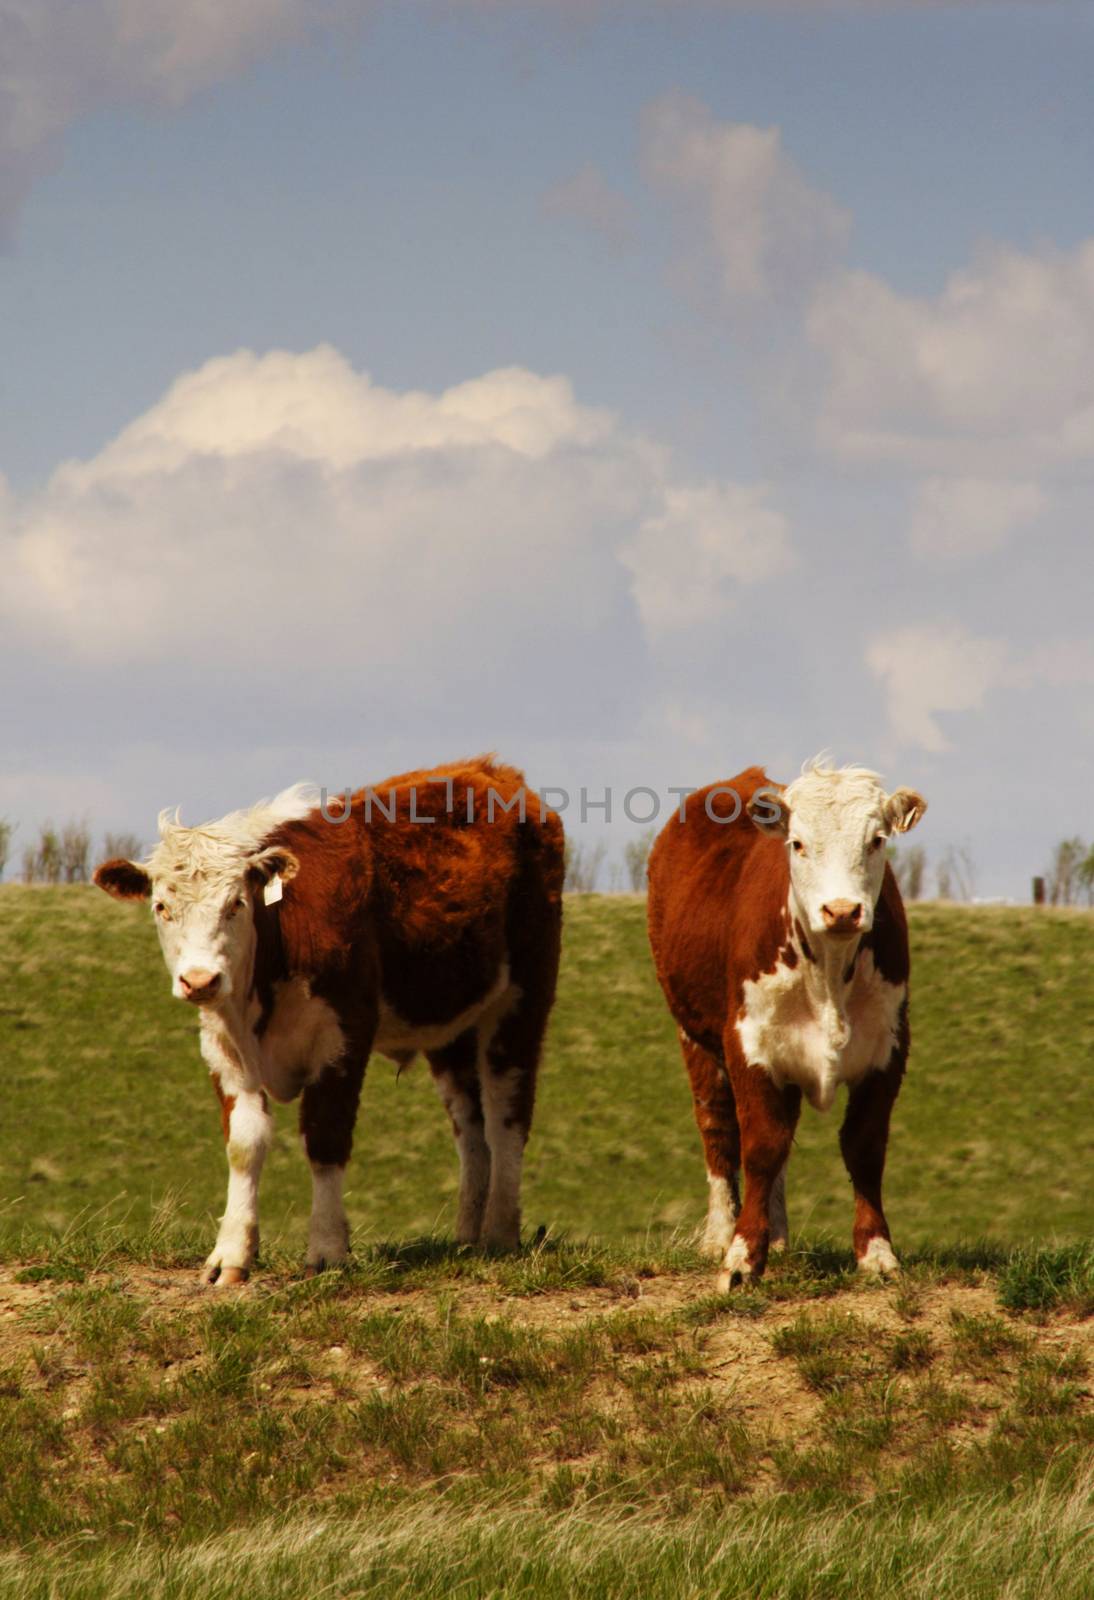 Two Hereford yearling cows standing on a grassy hill.